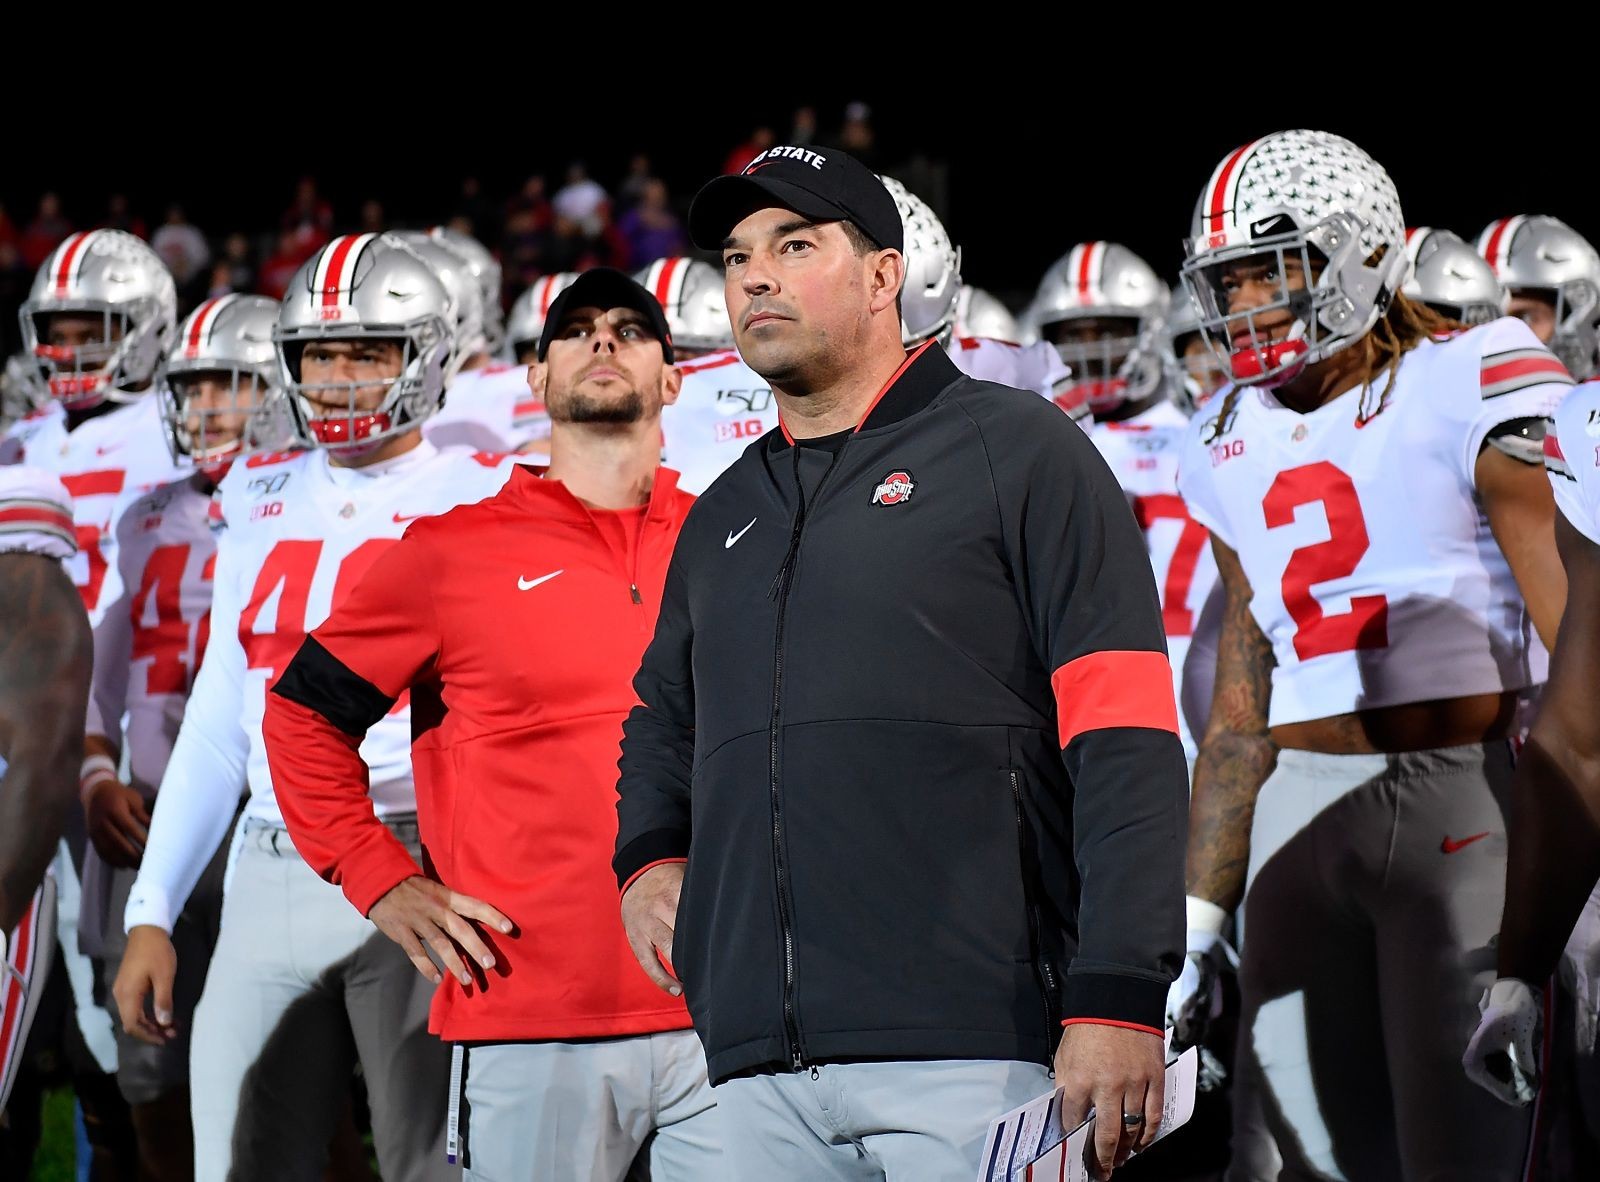 Ohio State Football: Tenure defining game for Day and Harbaugh